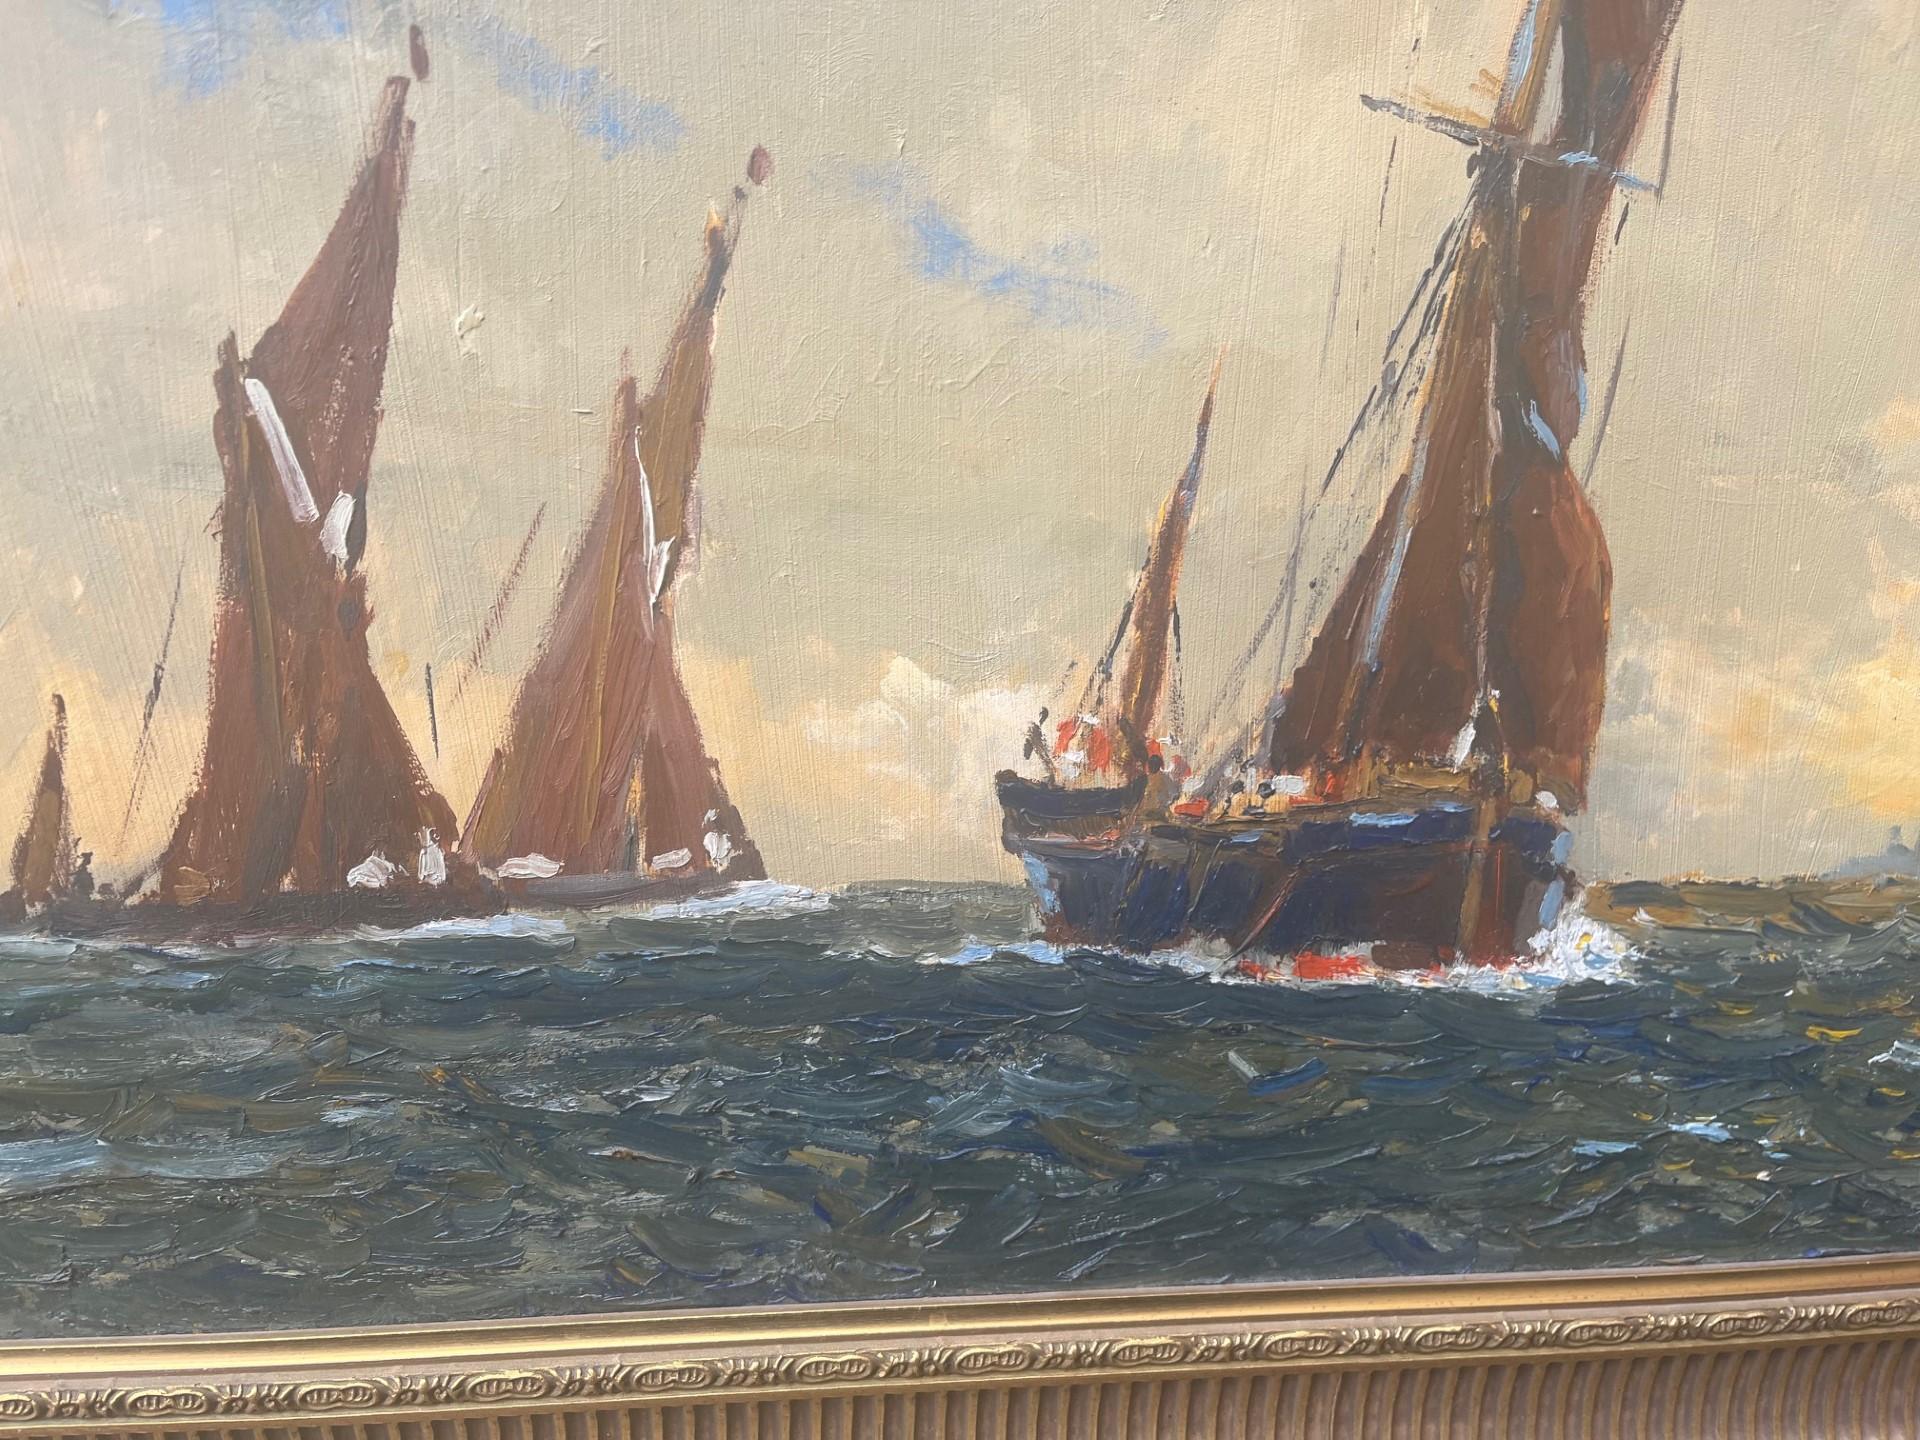 Vic Ellis RSMA
Thames Barges and other Shipping.
Oil on Board, Signed and Framed.
Ellis lived in Essex and latterly spent his time painting shipping on the Thames and the Medway.  He was an experienced sailor himself and loved depicting shipping in